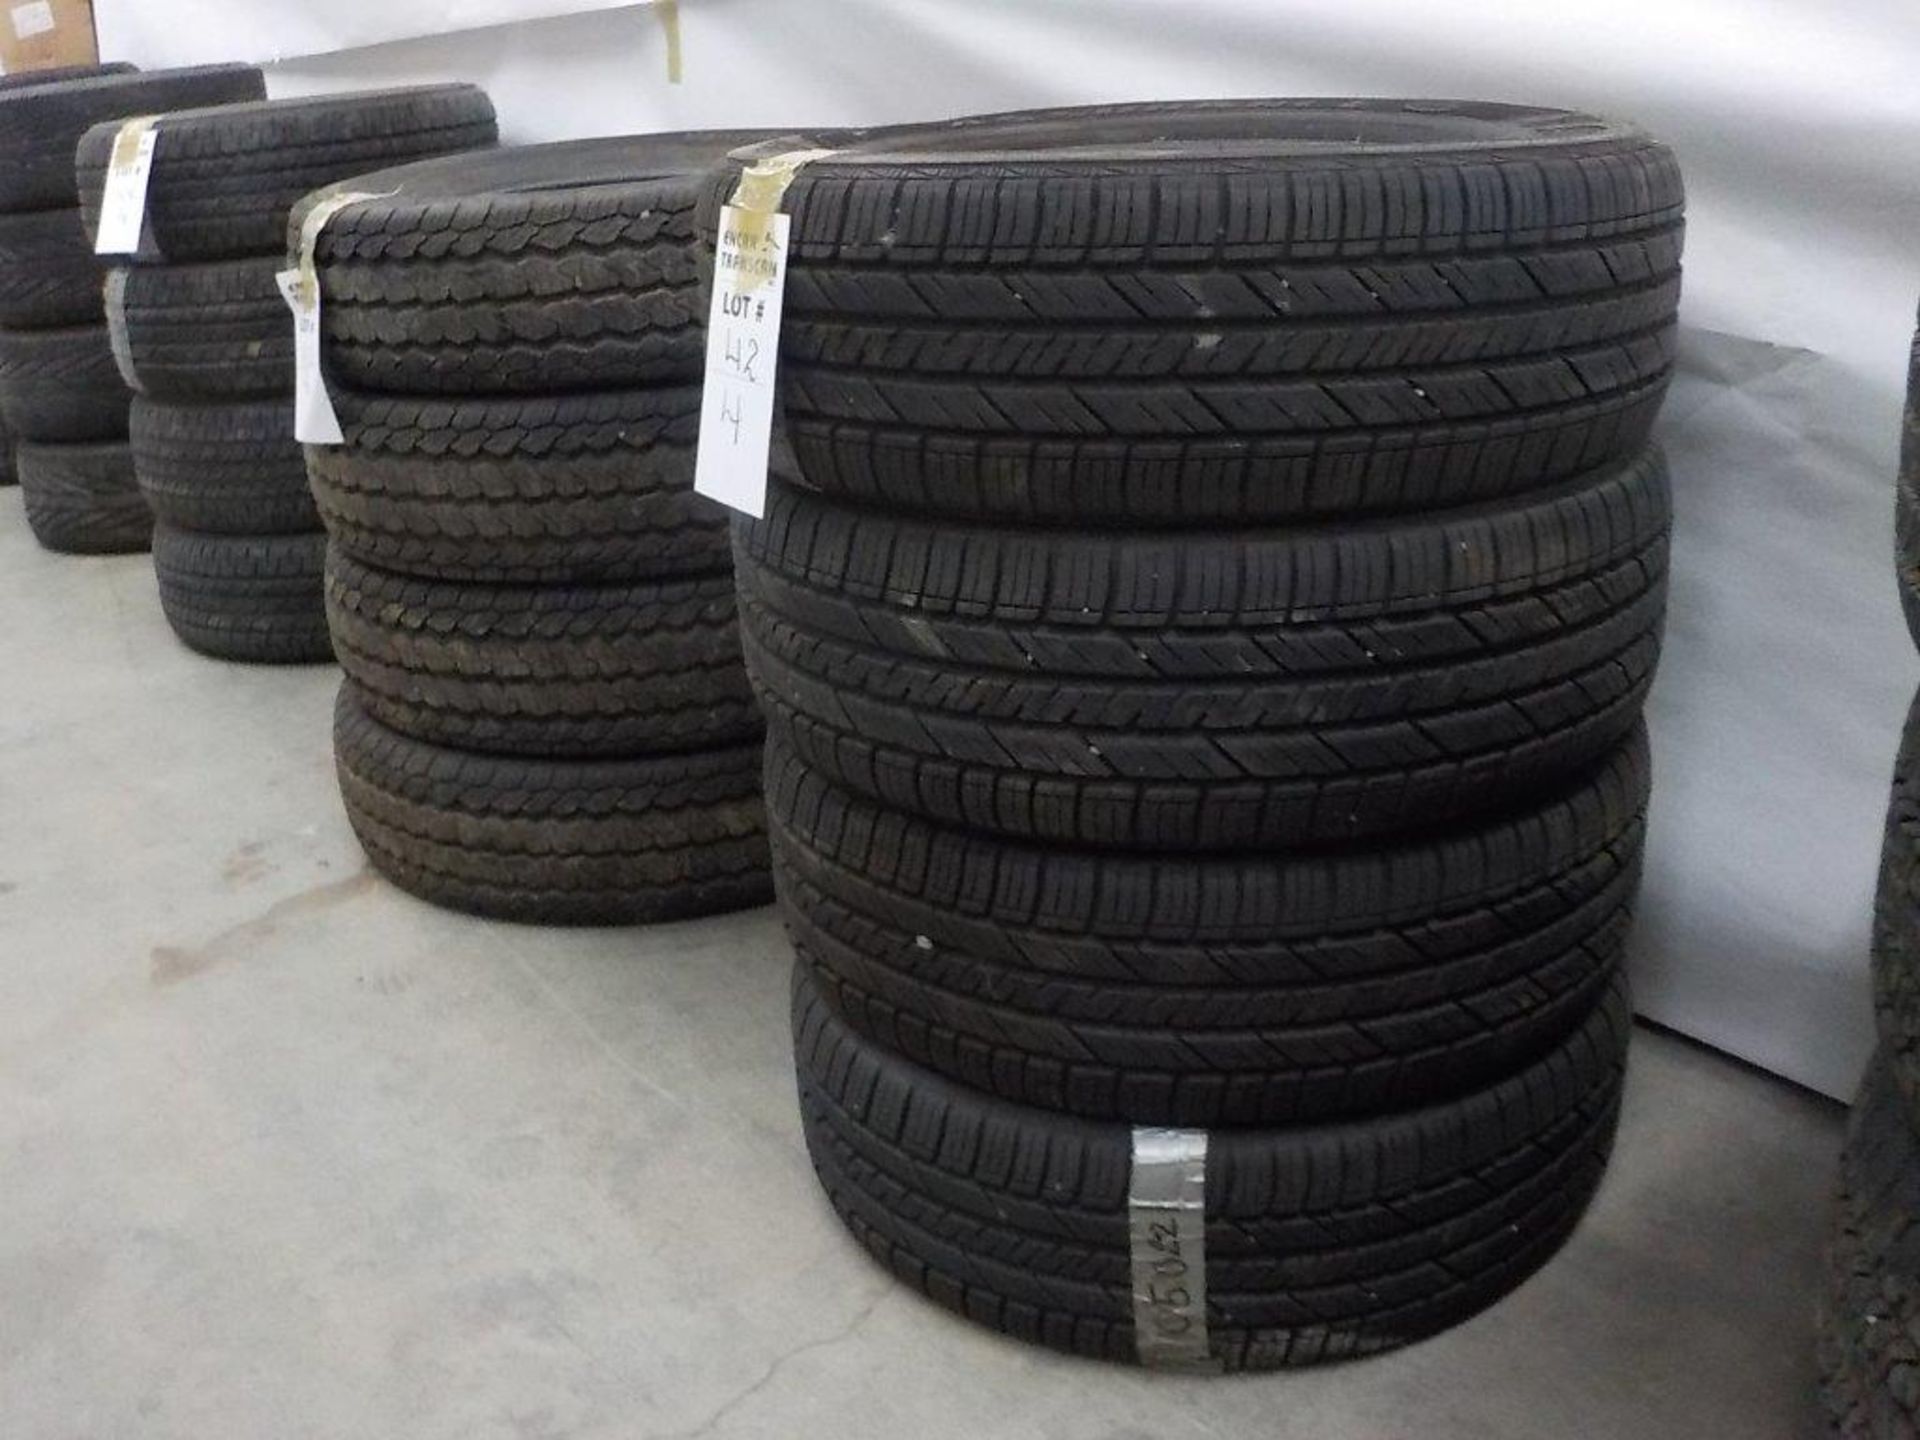 GOODYEAR ASSURANCE summertires, P215/70/R15 (used)